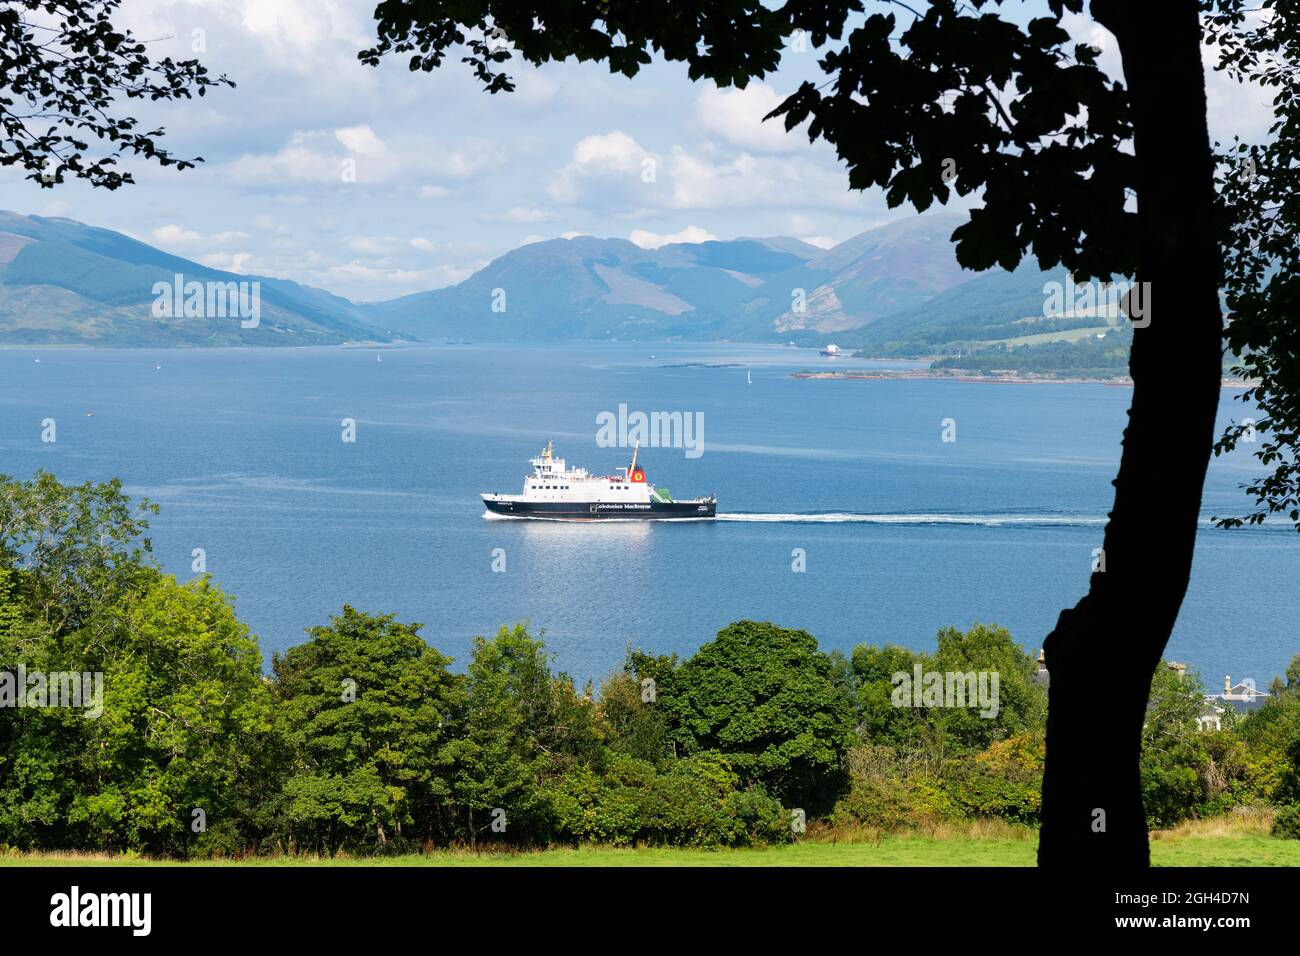 Isle of Bute - MV Argyle Calmac ferry approaching Rothesay as seen from Bogany Wood also known as Skippers Woods, Rothesay, Isle of Bute, Scotland, UK Stock Photo